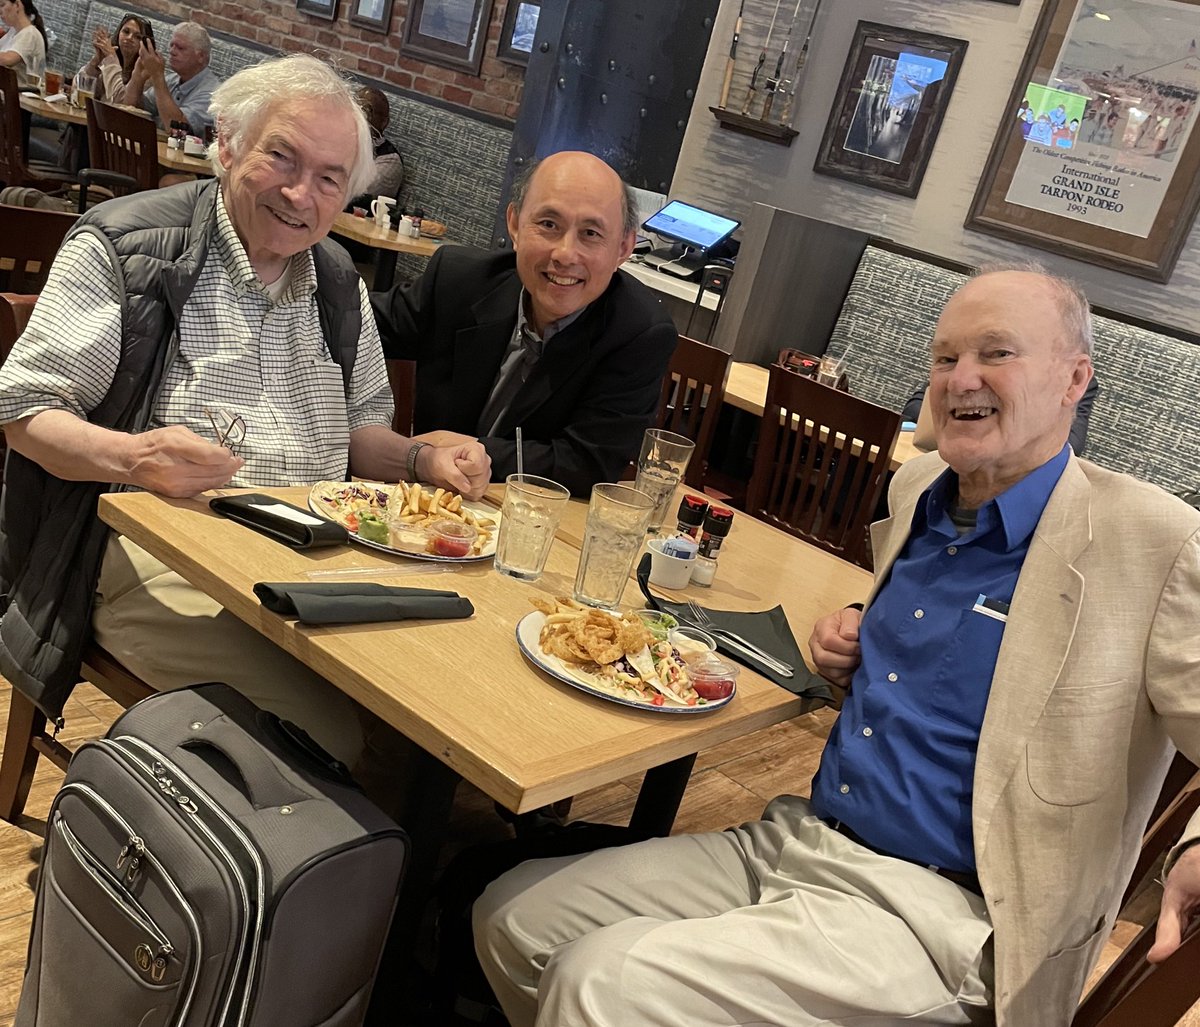 On our trip back from Houston to Boston, our flight was delayed for an hour. Jim Rice, John Hutchinson, and I had a leisurely seafood lunch at the Houston-Bush International Airport. I questioned them about early years of Fracture Mechanics.